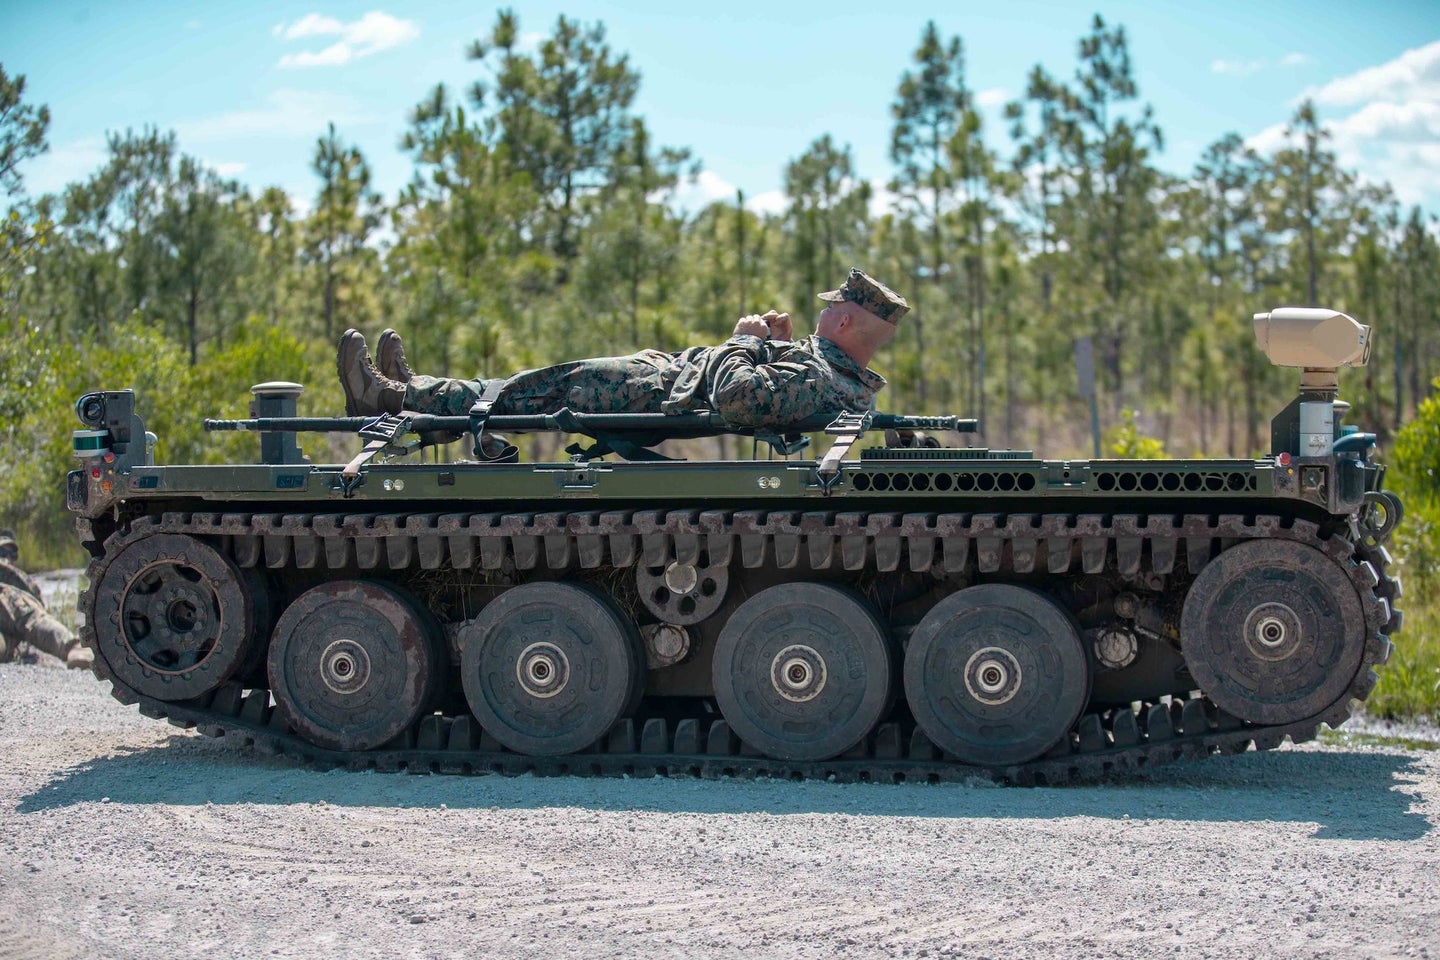 A Marine lies on top of a robotic vehicle on treads.